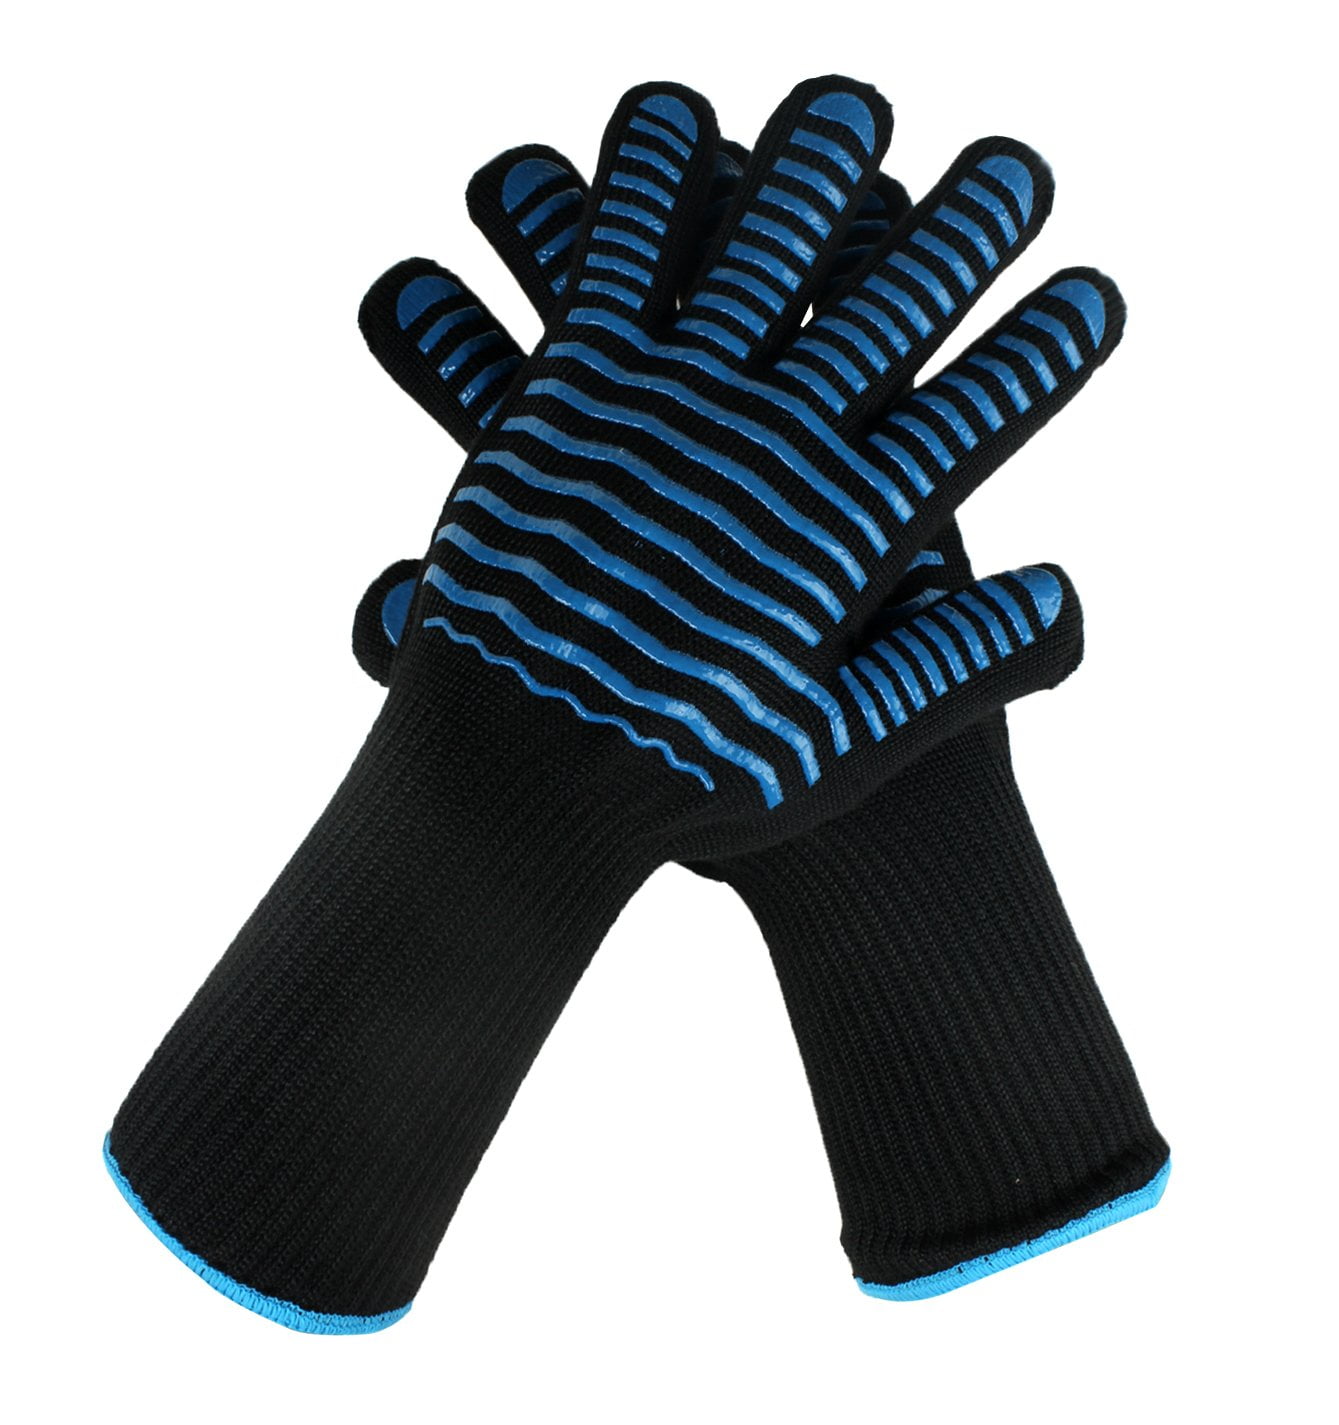 1pc Heat Resistant Glove Made Of Flame Retardant Oxide Fiber For Bbq, Oven,  Microwave, Cooking With Silicone & Anti-slip Design